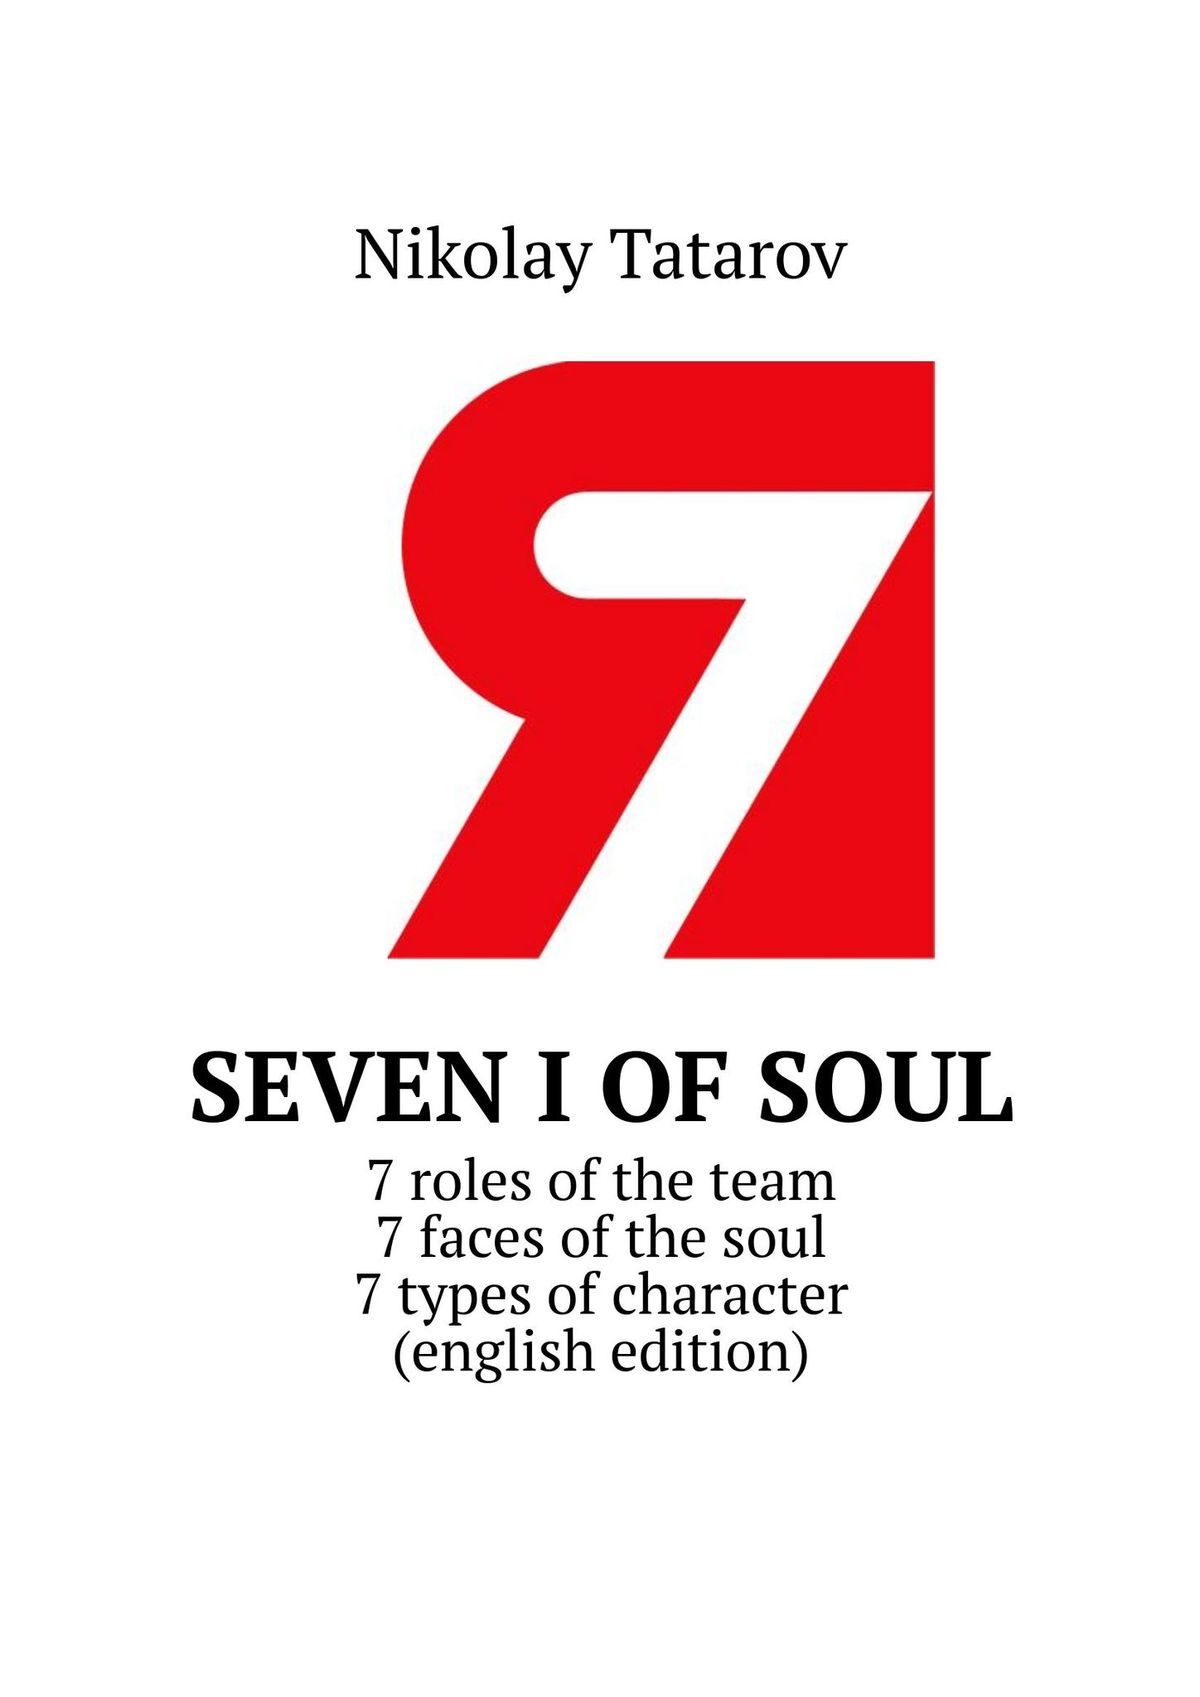 7I. The brief course. 7 roles of the team. 7 faces of the soul. 7 types of character (english edition)